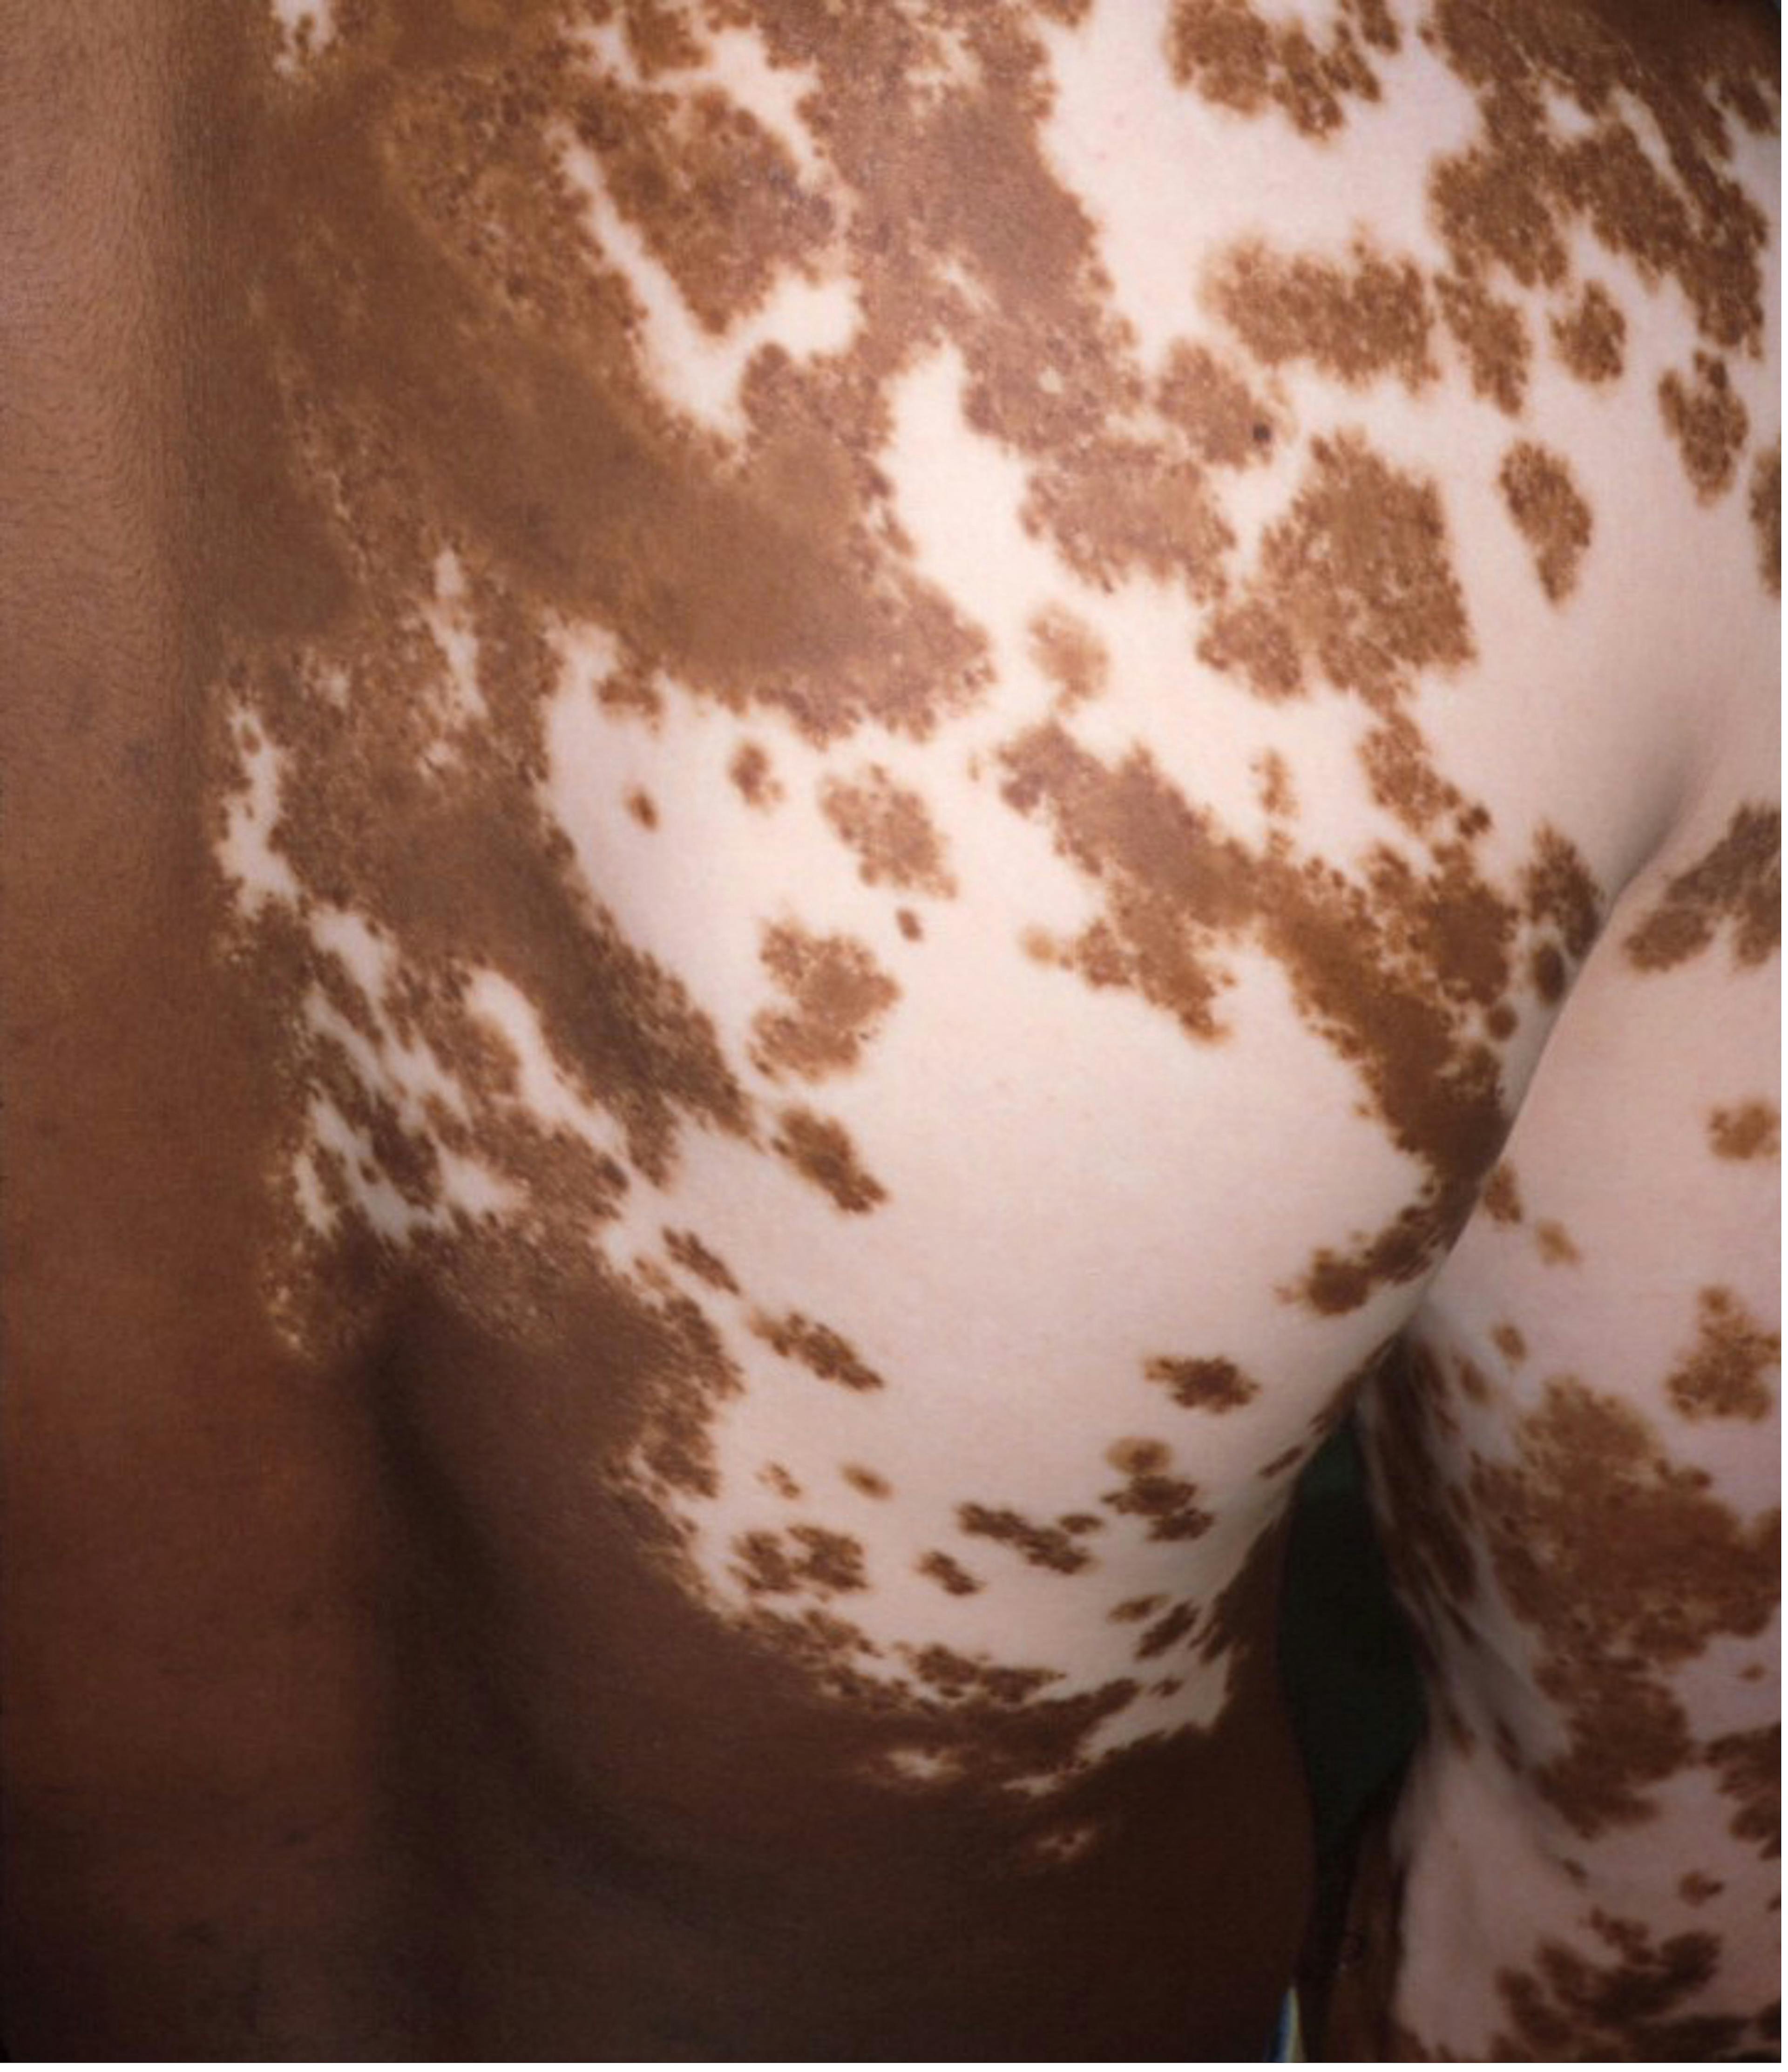 A Case of Vitiligo in an 11-Year-Old Male